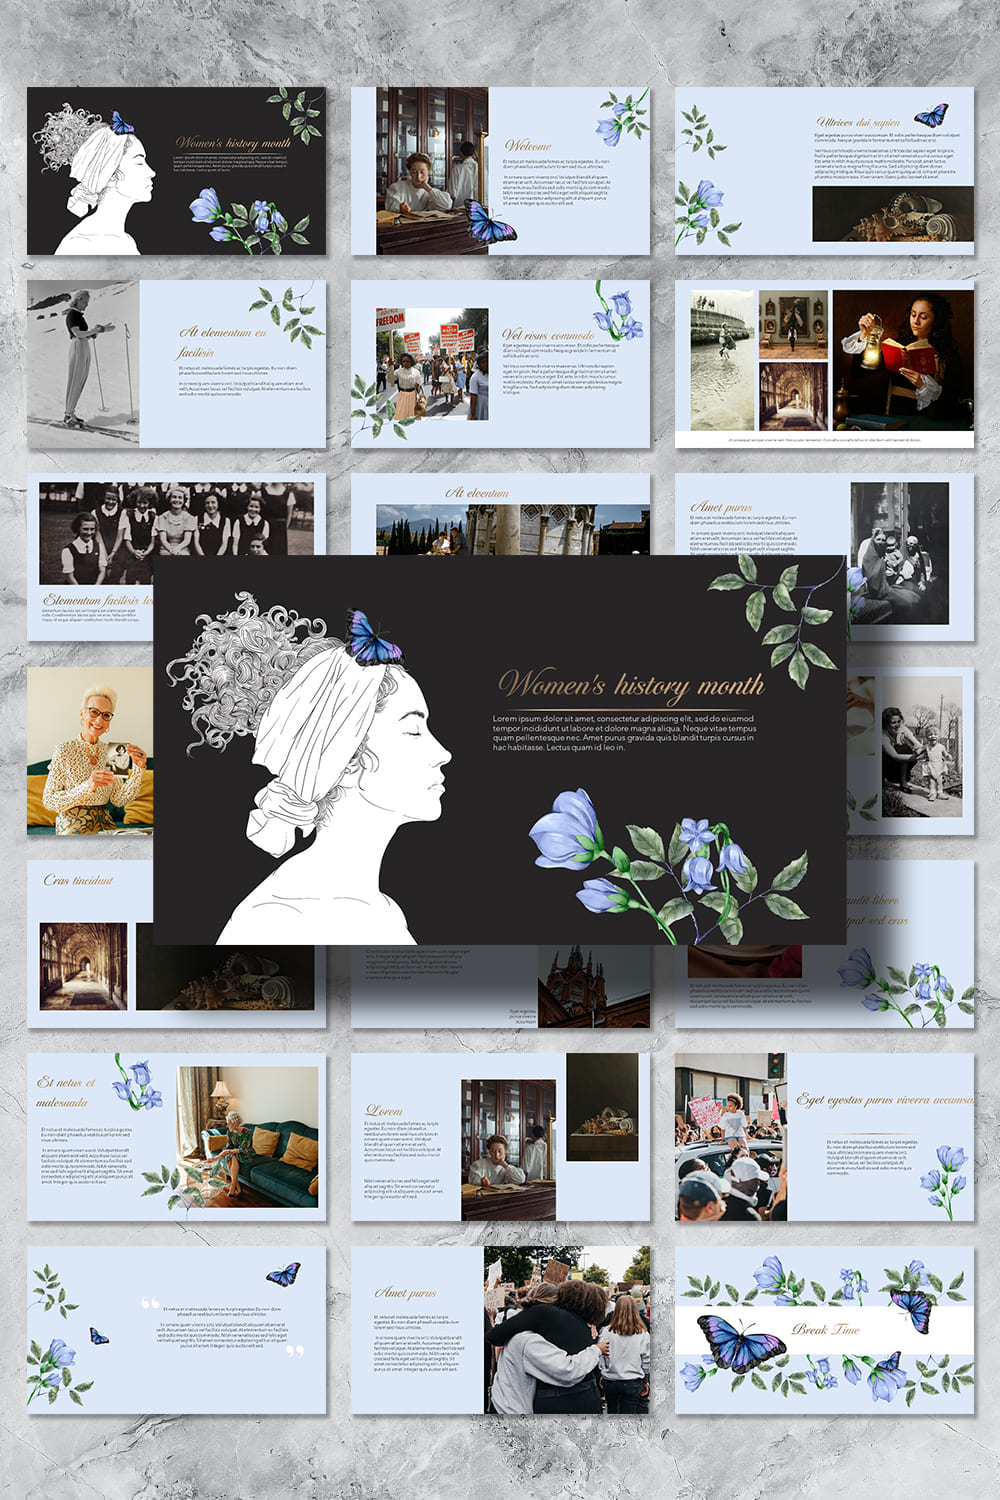 Women's History Month Powerpoint Presentation - pinterest image preview.